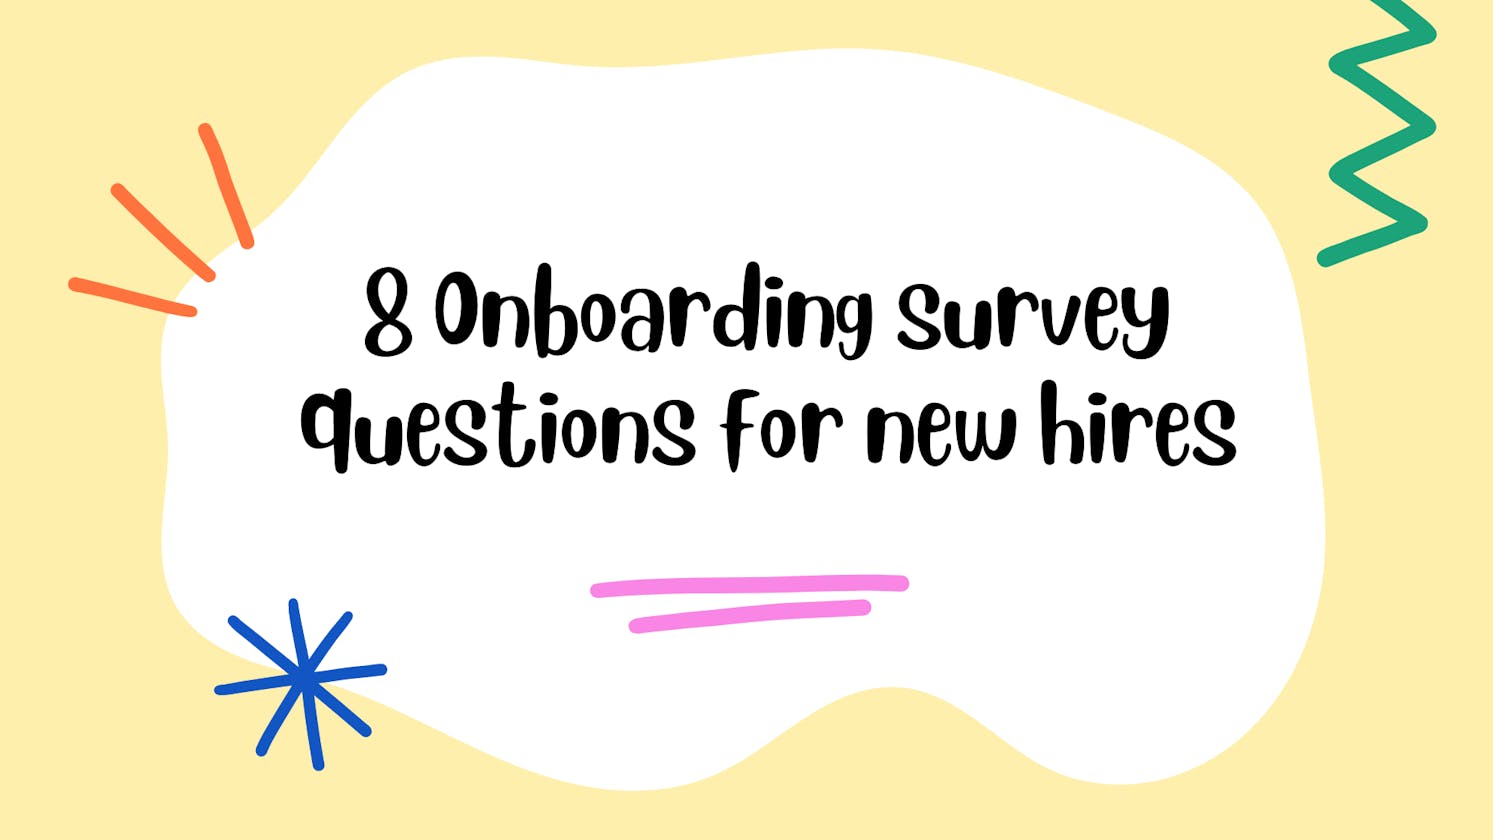 8 Onboarding survey questions for new hires